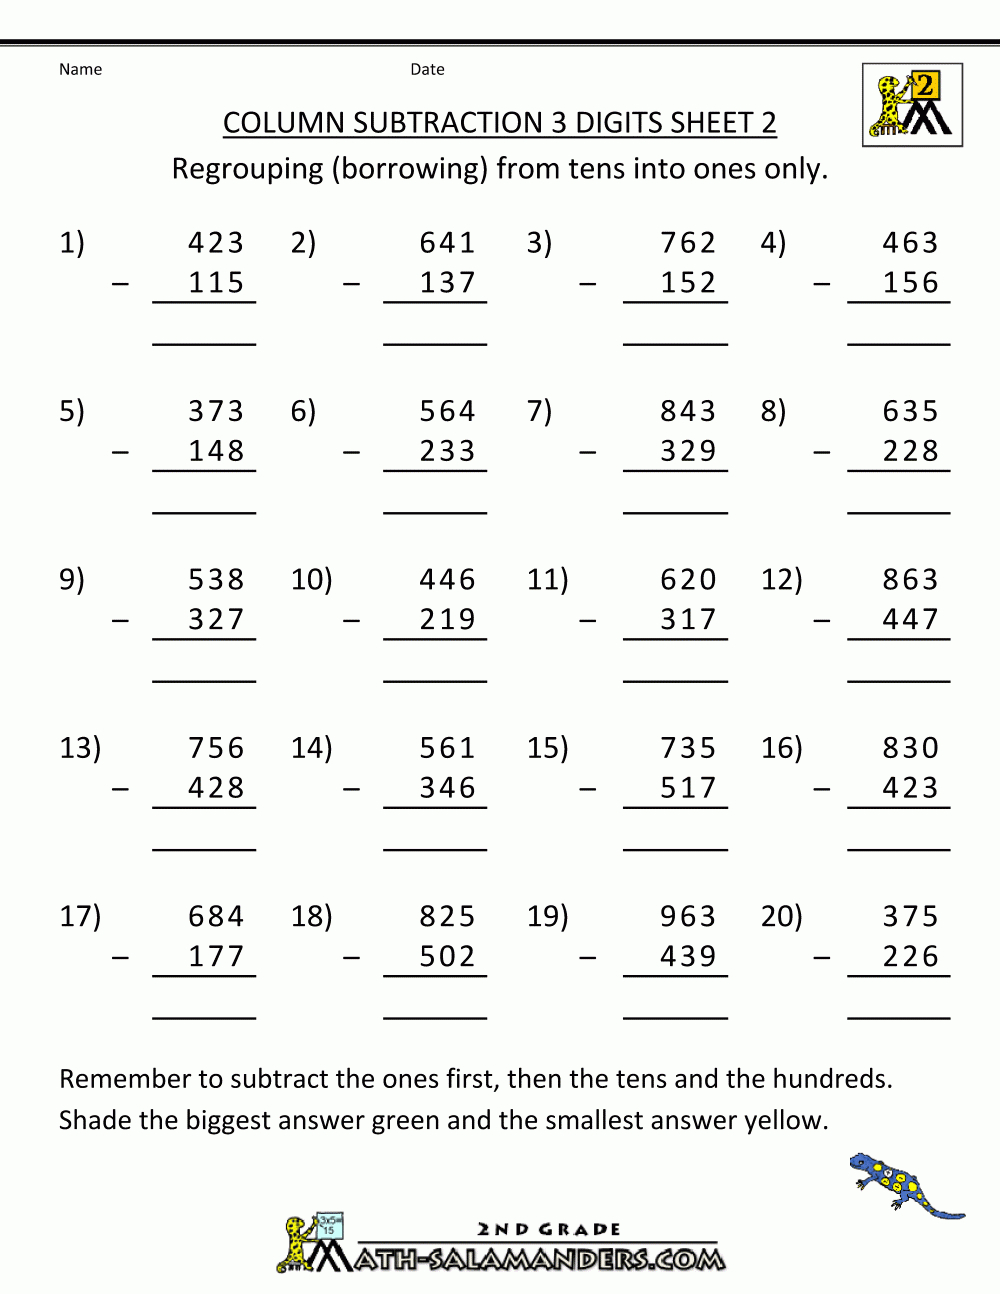 Free Printable 3 Digit Subtraction With Regrouping Worksheets Free 